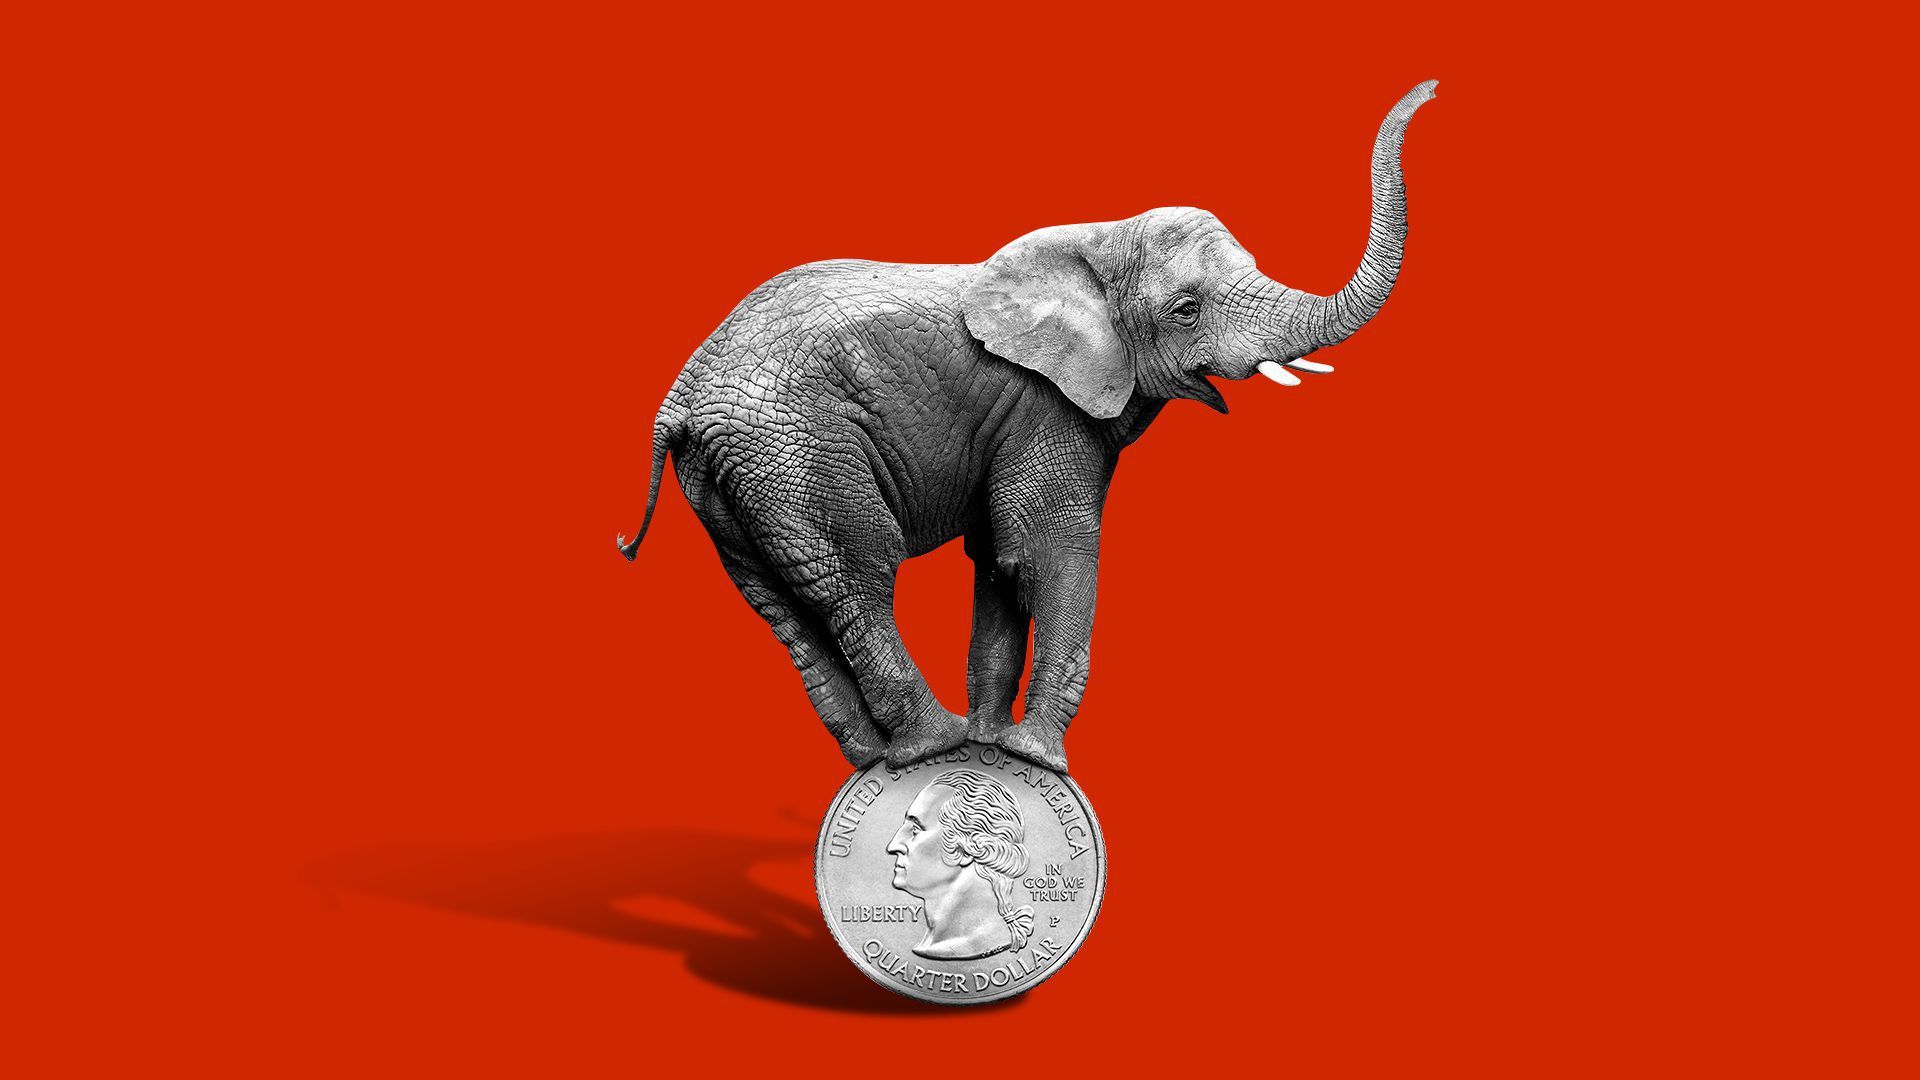 Elephant standing on coin